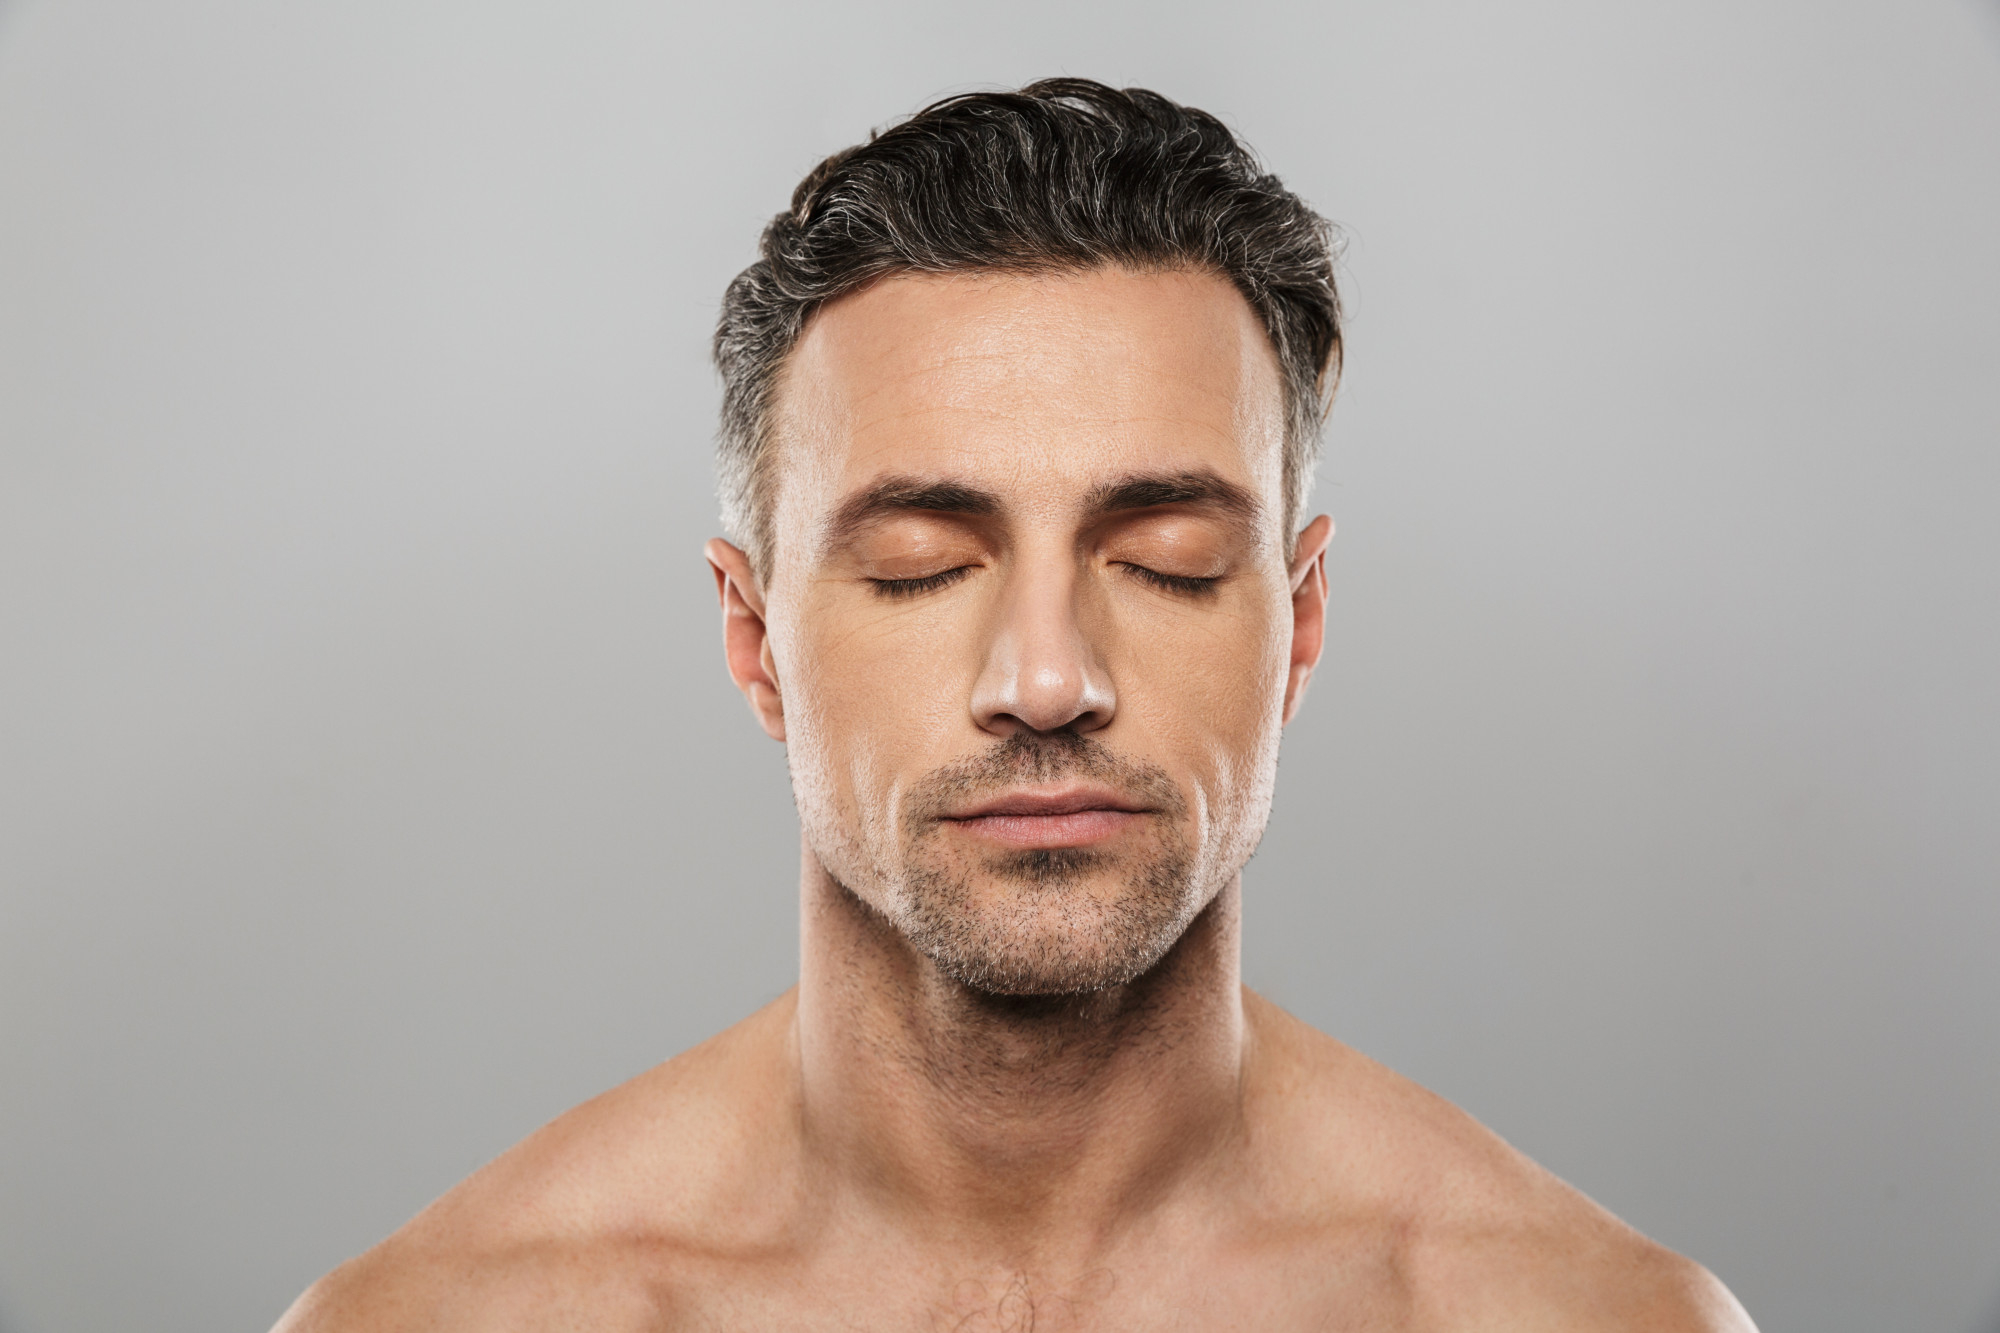 Man with perfect facial contours after Radiesse treatment.